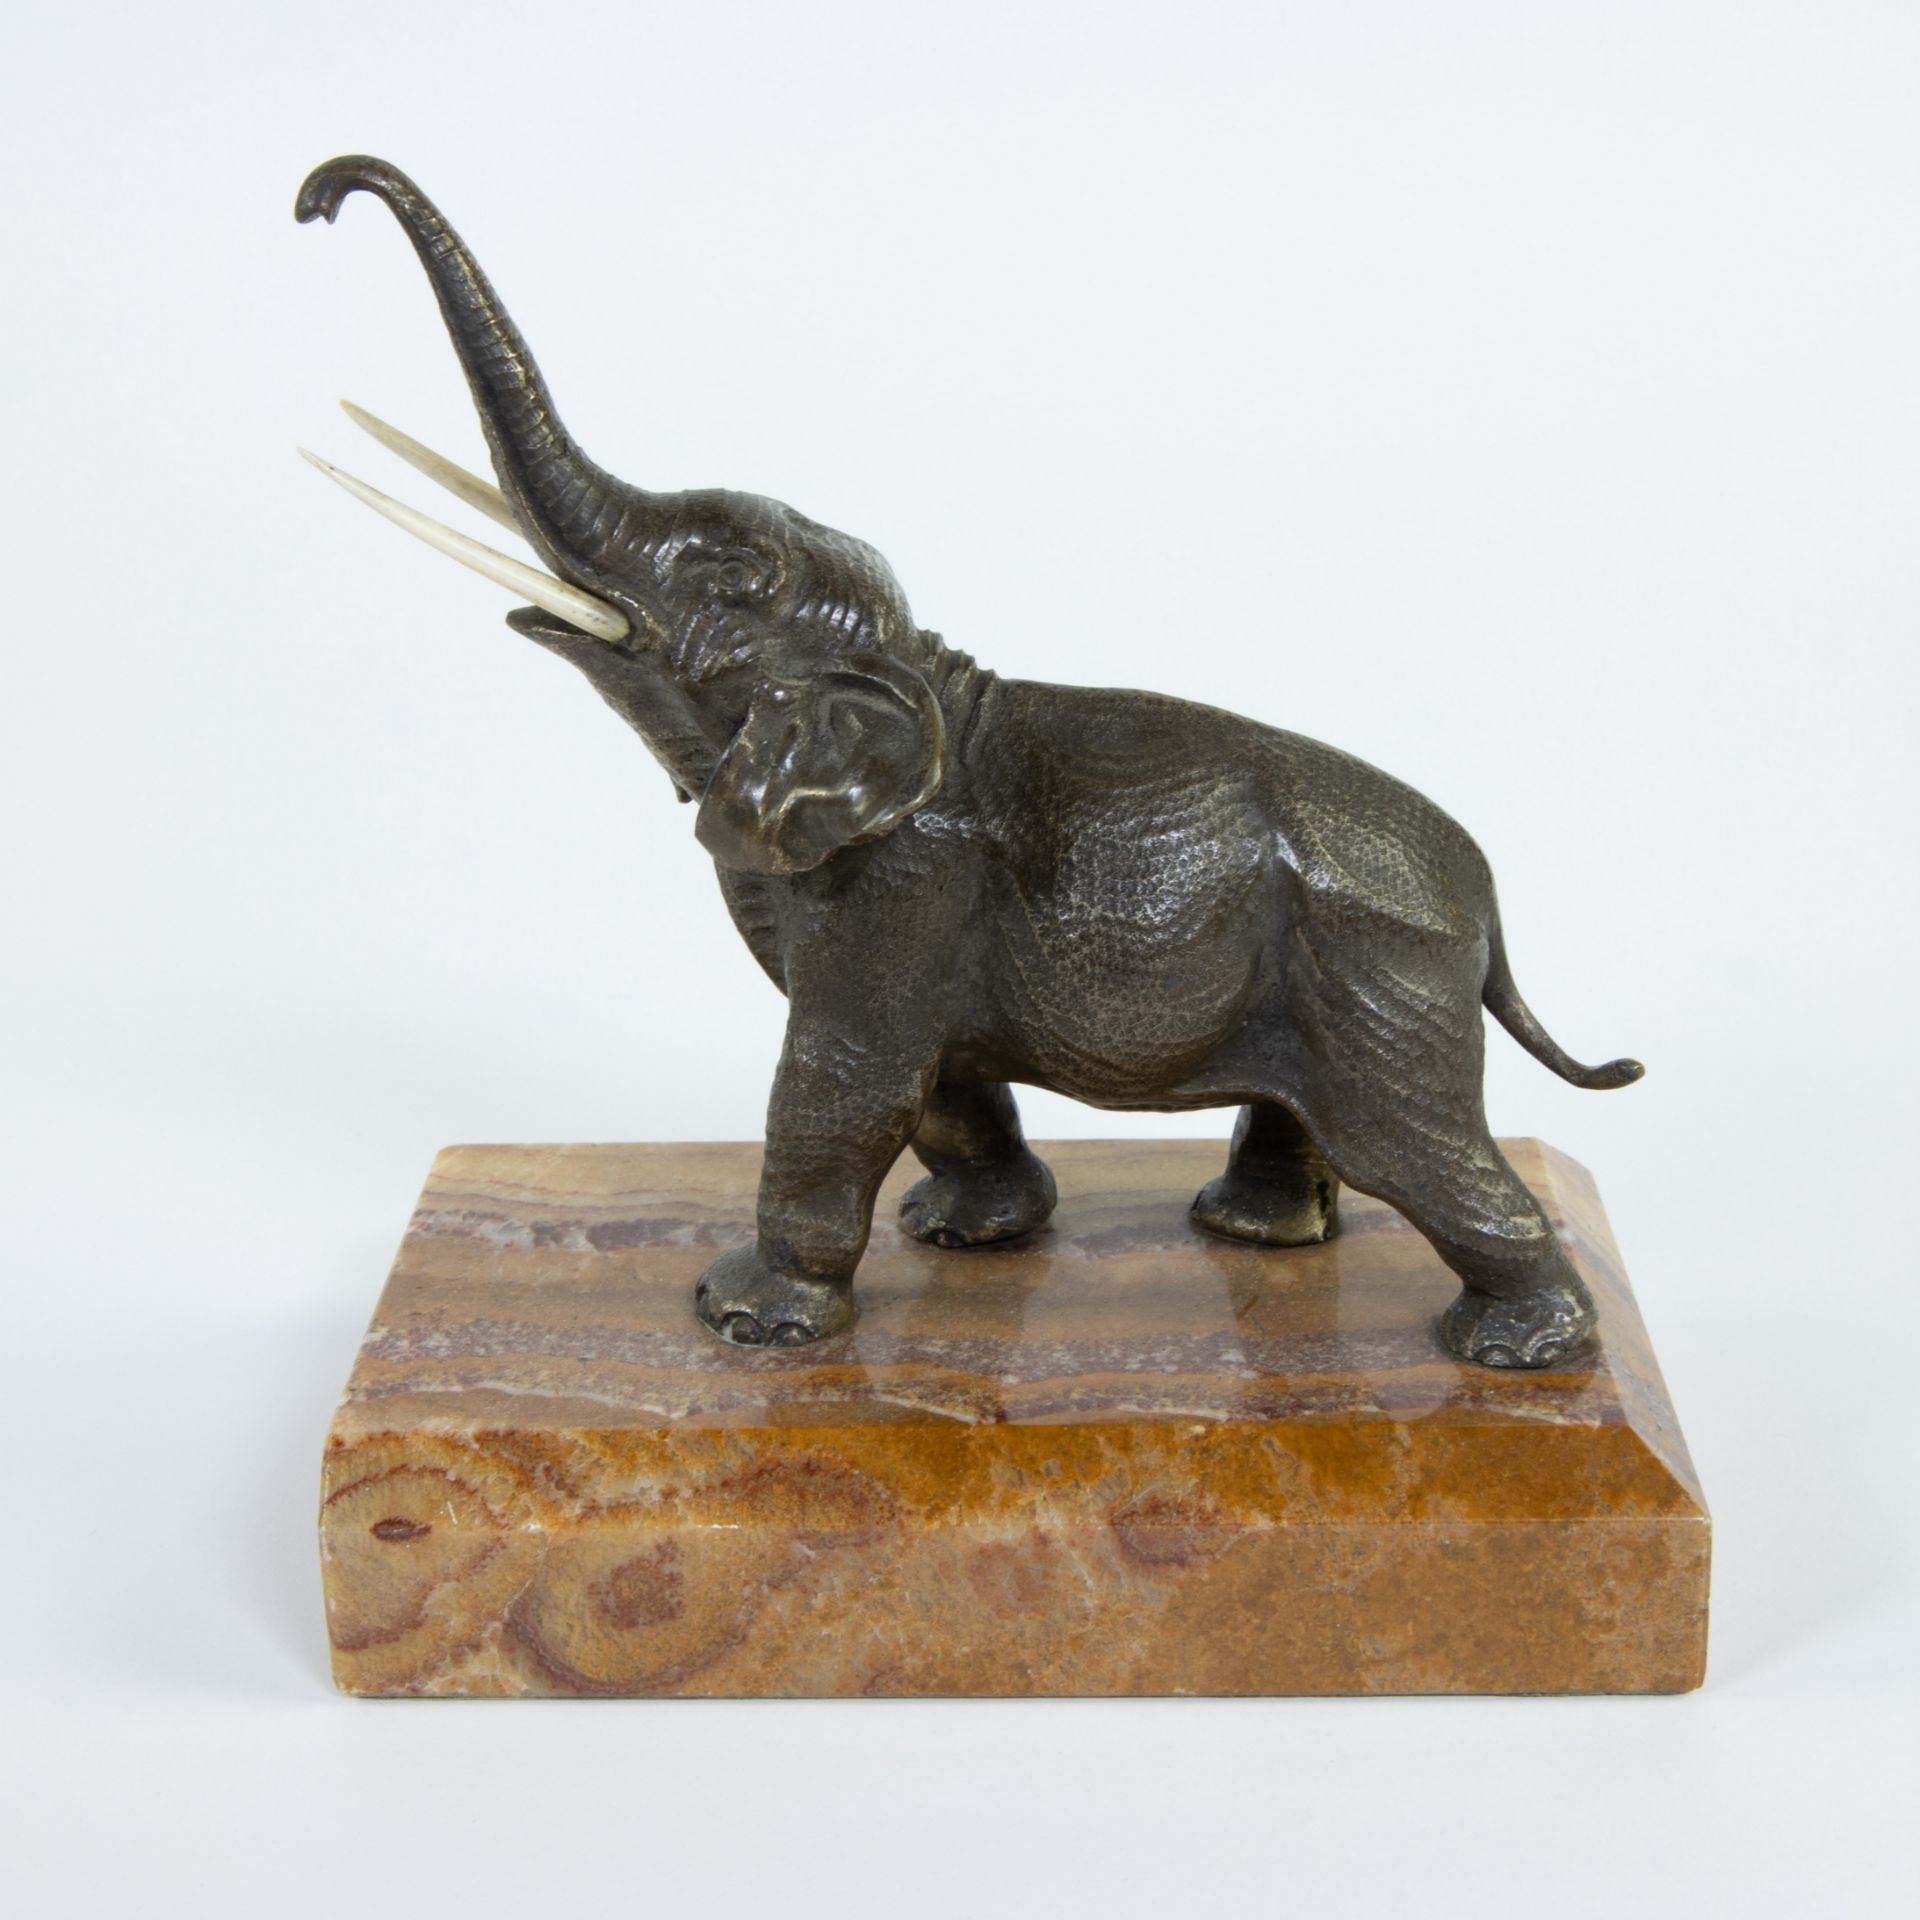 2 paperweight figurines on a marble base, harlequin and elephant, drawn on the marble base Claesens. - Image 8 of 10